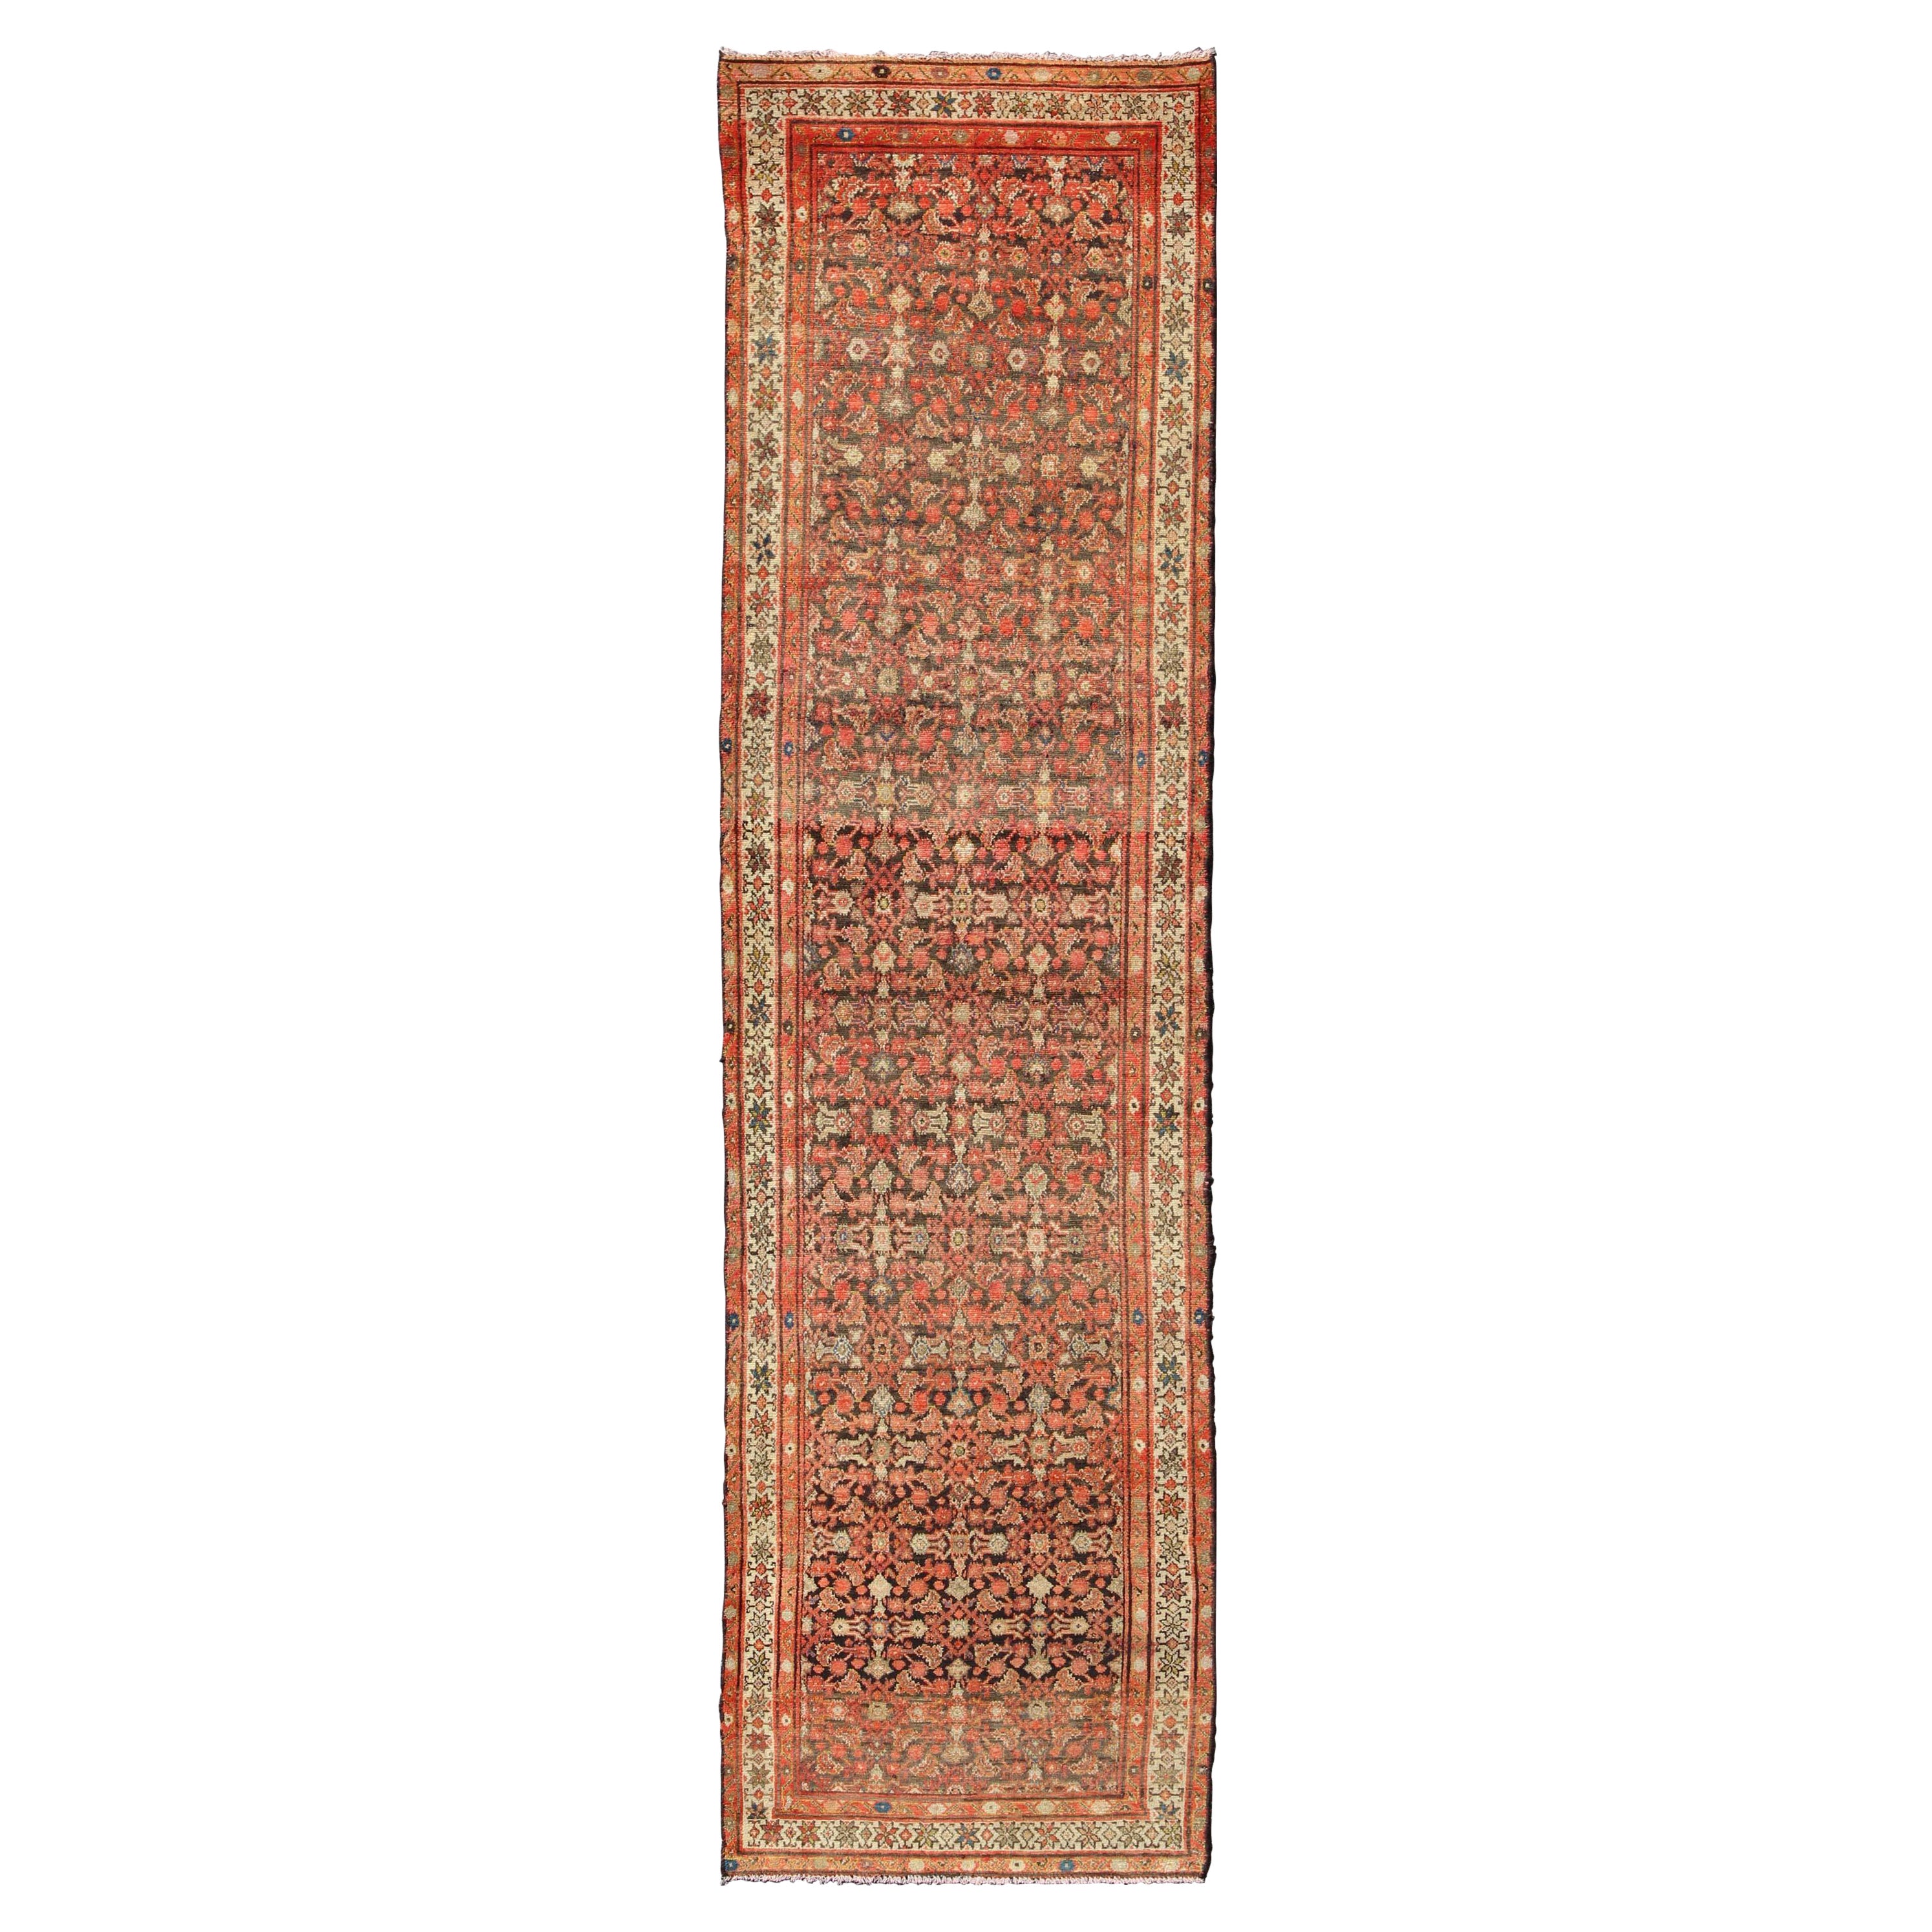 Antique Early 20th Century Persian Herati Design Malayer Runner in Brown & Rust